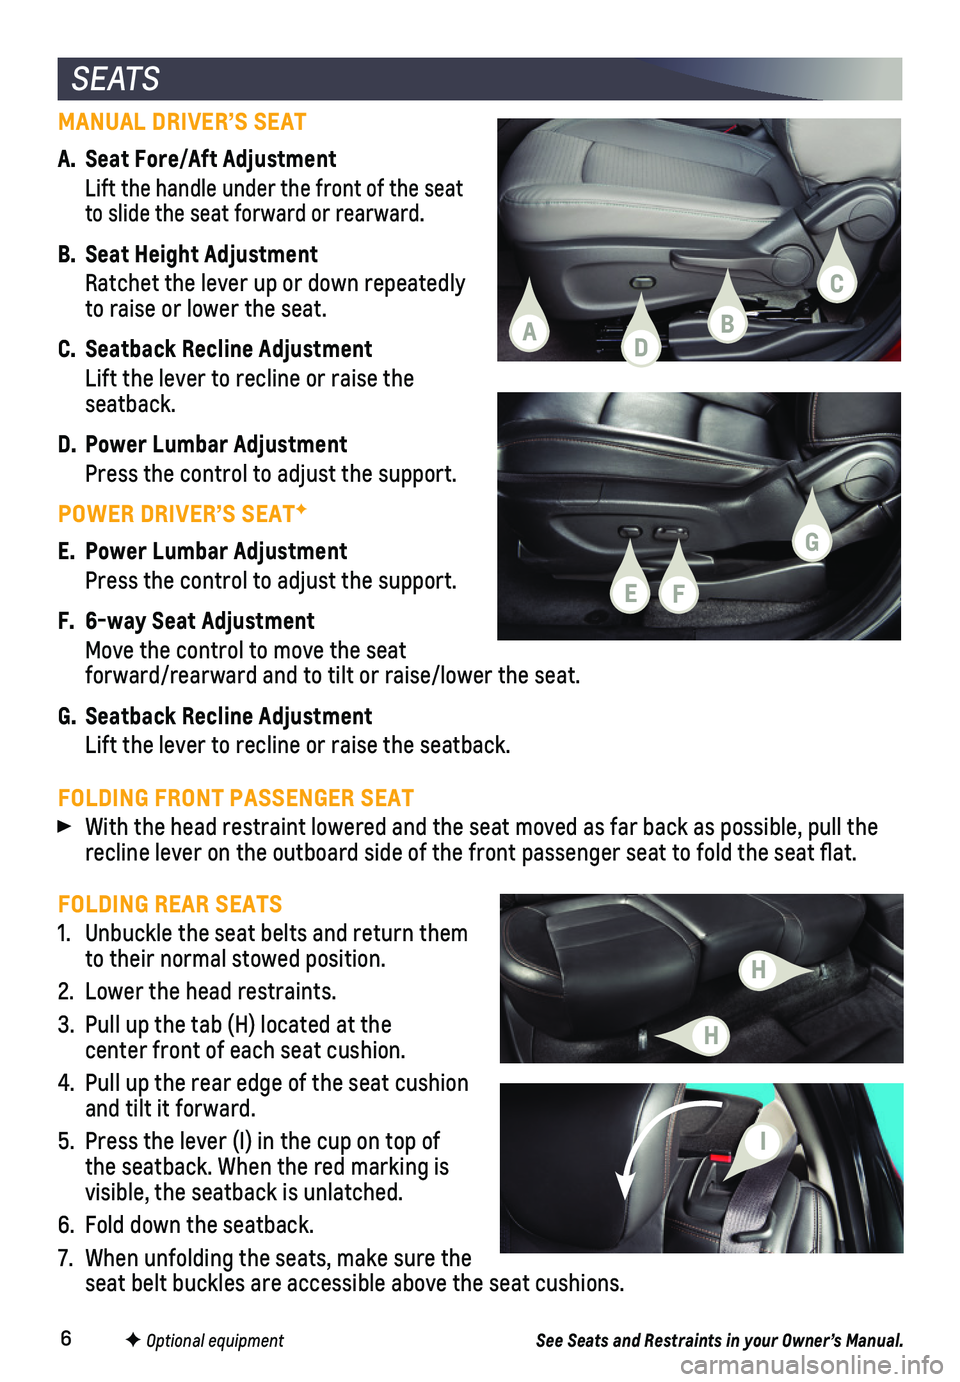 CHEVROLET TRAX 2019  Get To Know Guide 6
FOLDING REAR SEATS
1. Unbuckle the seat belts and return them to their normal stowed position.
2. Lower the head restraints.
3. Pull up the tab (H) located at the  center front of each seat cushion.